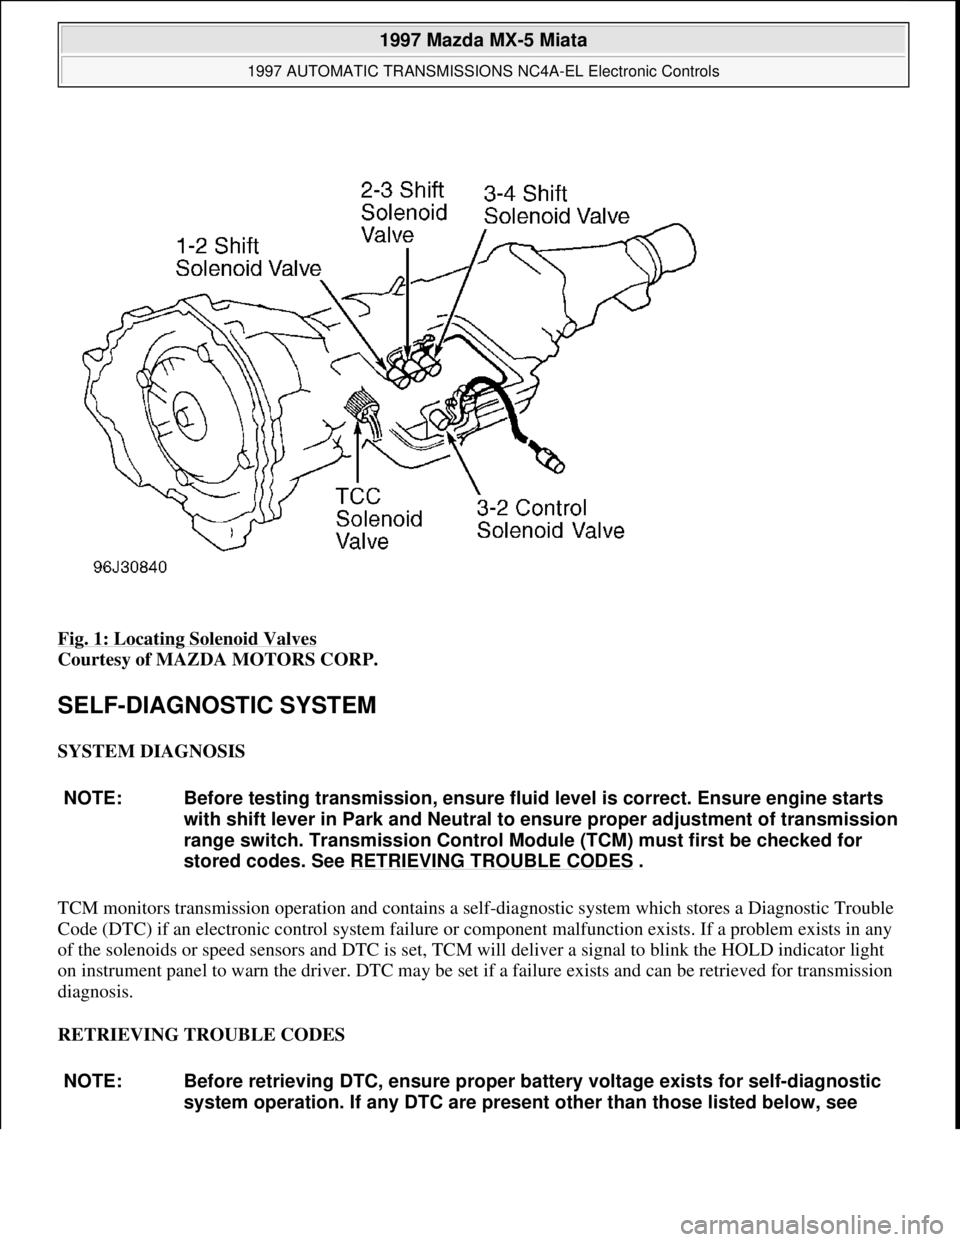 MAZDA MIATA 1997  Factory Repair Manual Fig. 1: Locating Solenoid Valves 
Courtesy of MAZDA MOTORS CORP. 
SELF-DIAGNOSTIC SYSTEM 
SYSTEM DIAGNOSIS 
TCM monitors transmission operation and contains a self-diagnostic system which stores a Dia